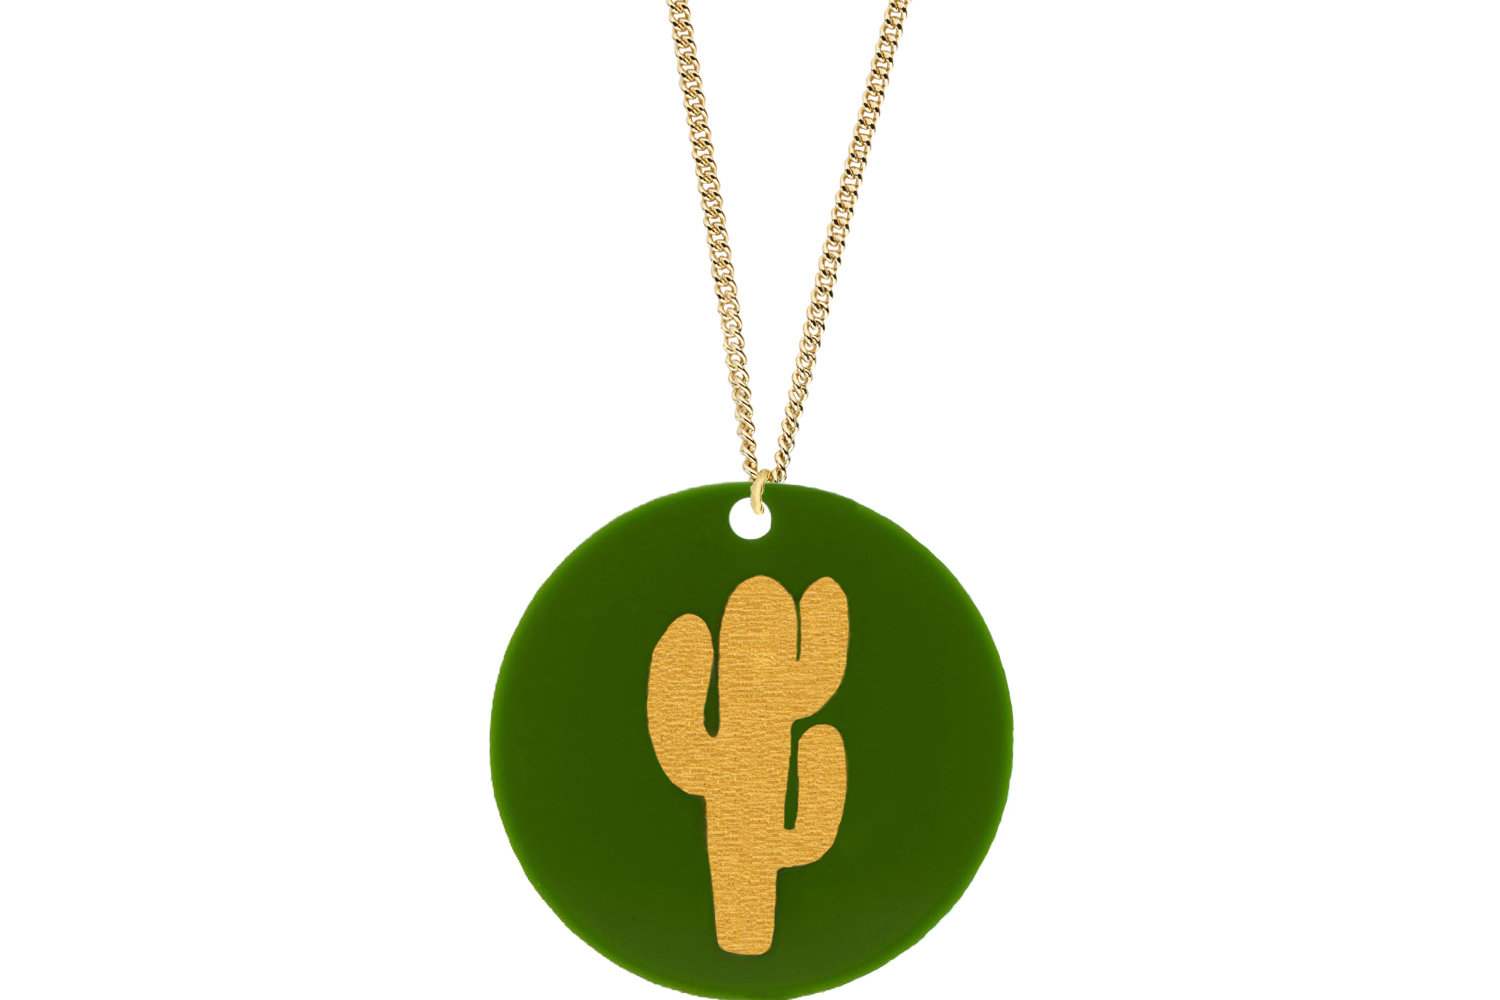 Cactus Pendant Subtle Style Refined with Paint on Chain Necklace